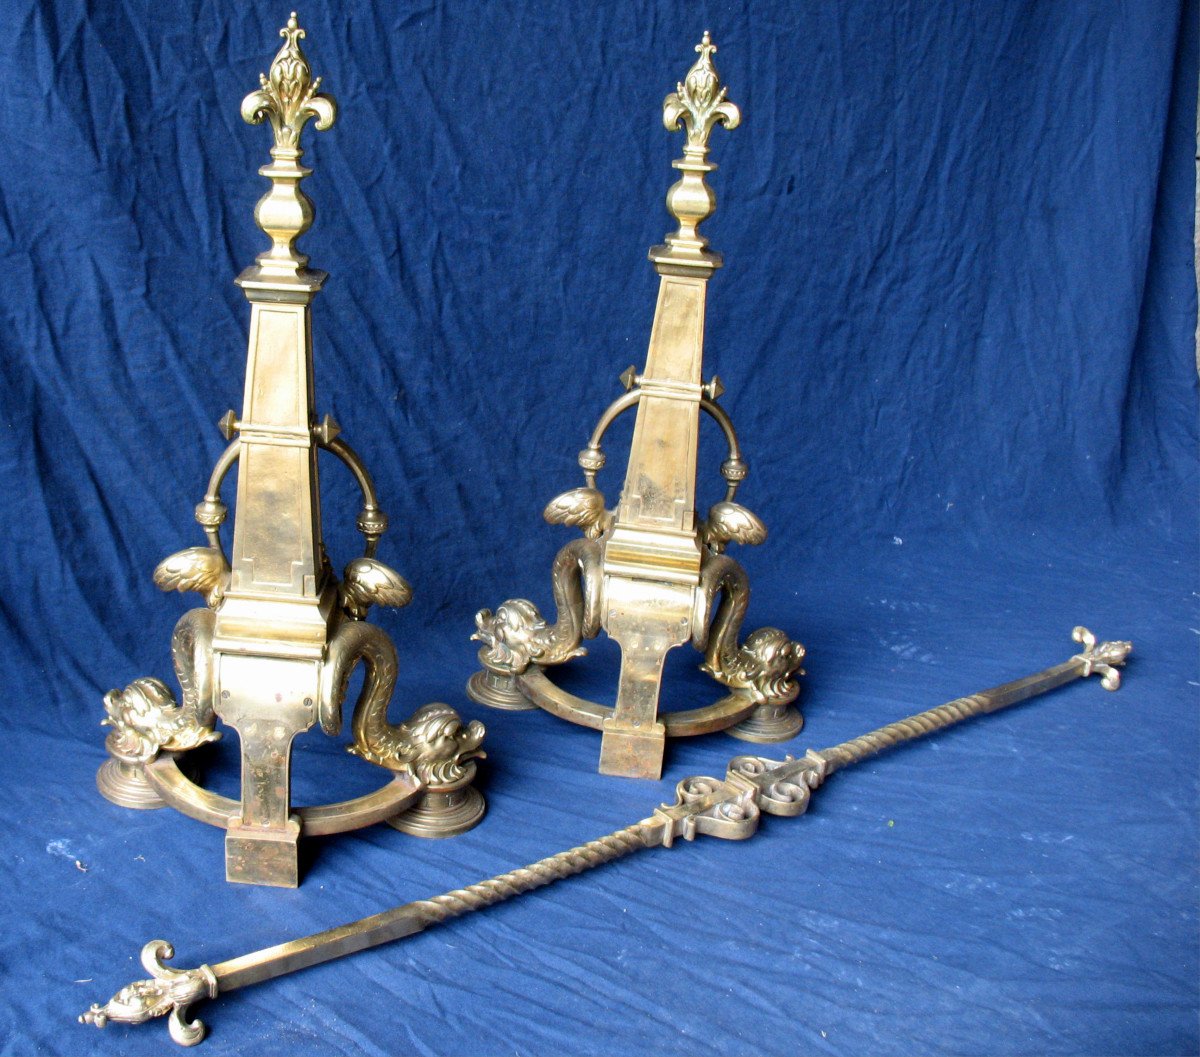 Pair Of Large Andirons Andirons In Gilded Bronze In The Louis XIV Style, 19th Century-photo-7